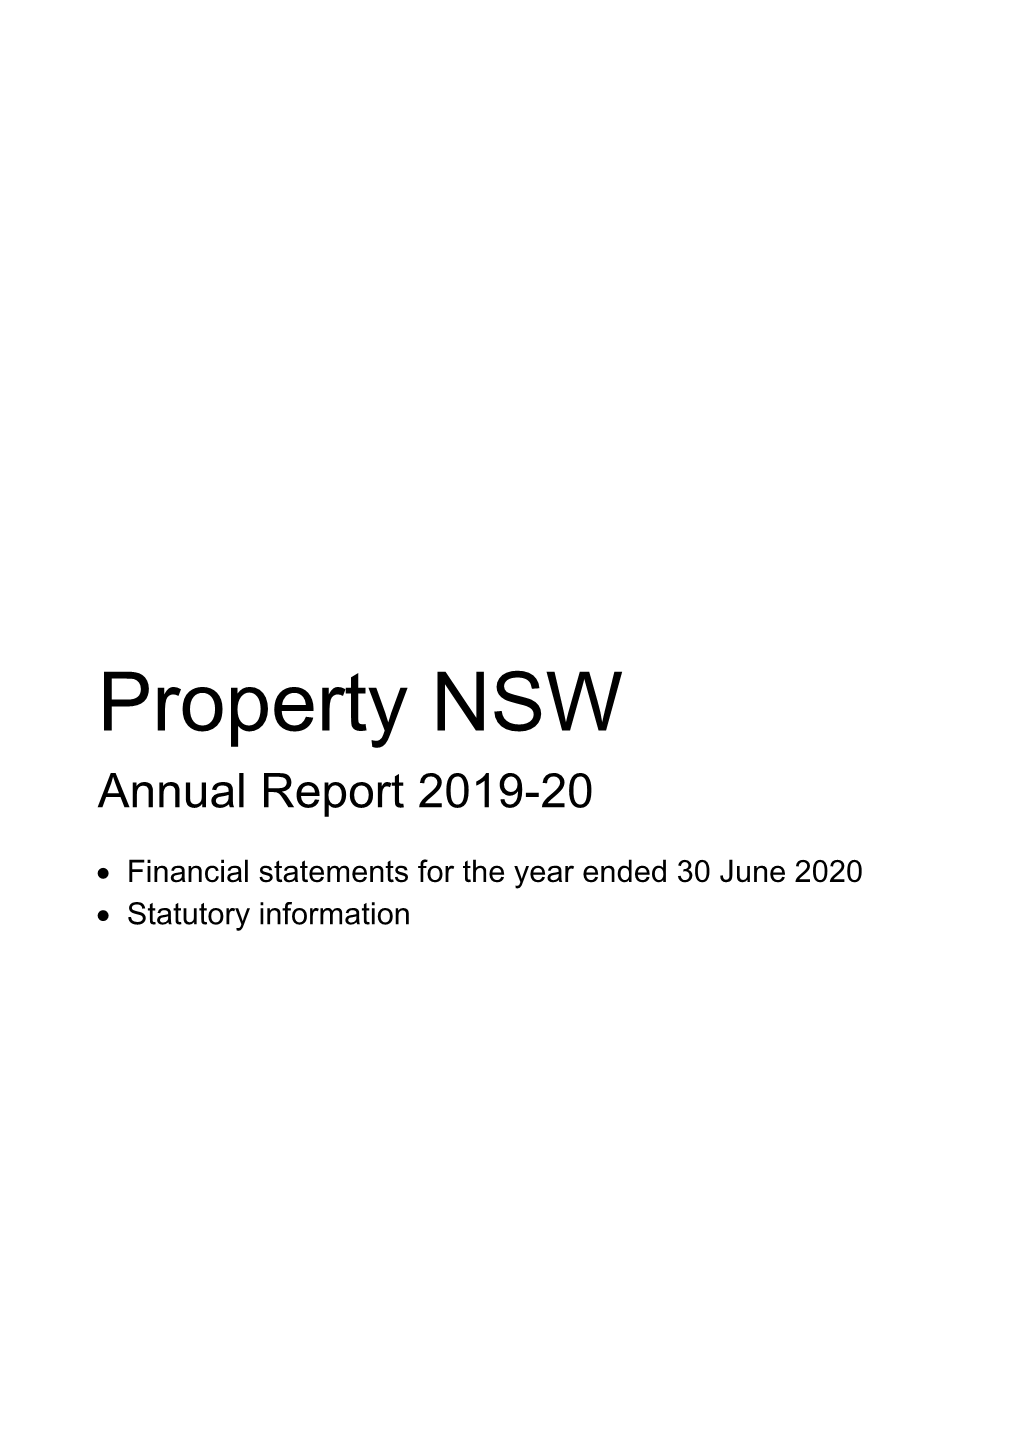 Property NSW Annual Report 2019-20